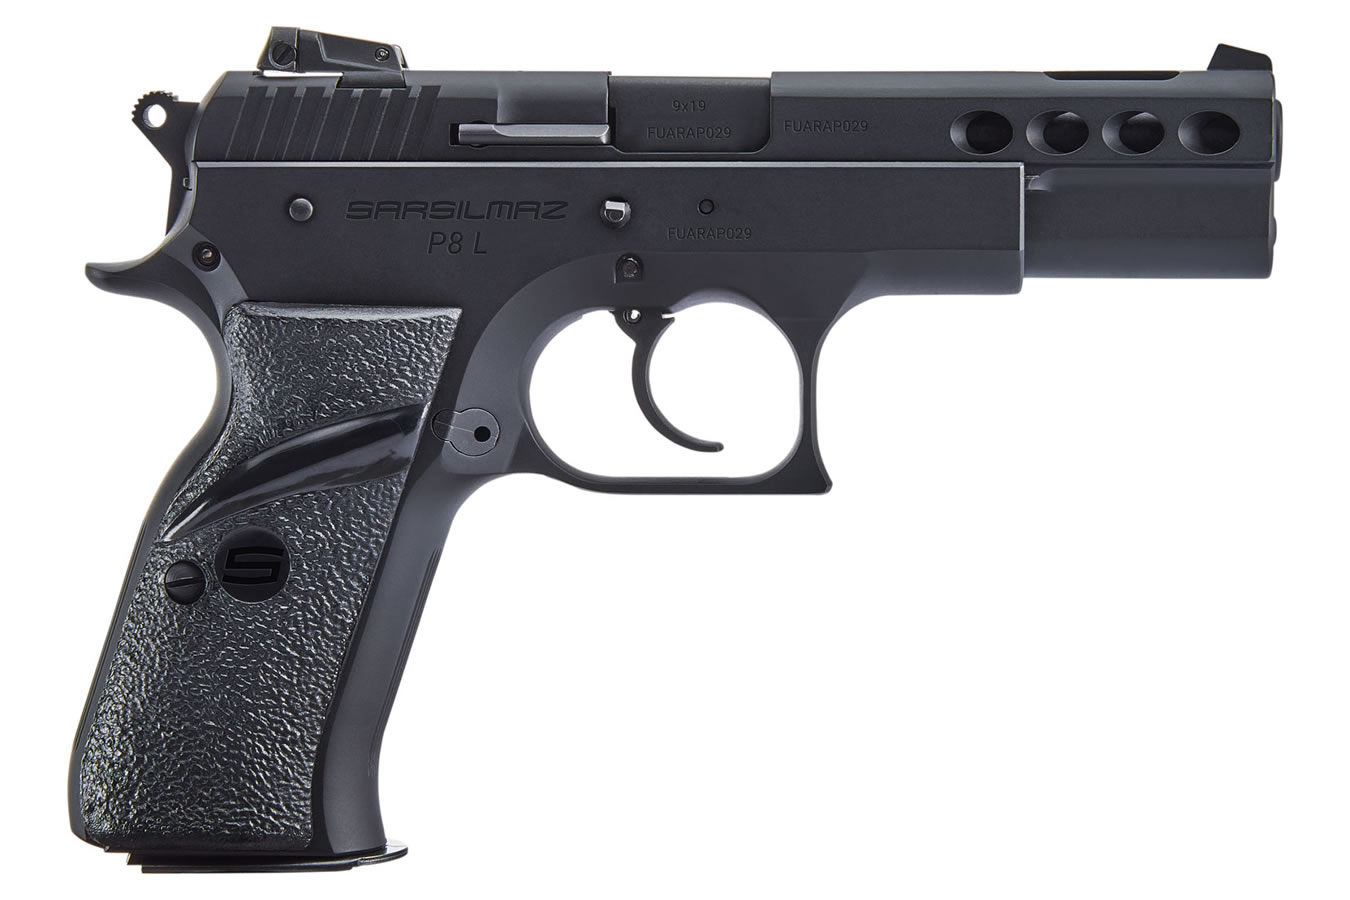 P8L BLACK 9MM PISTOL WITH MANUAL SAFETY